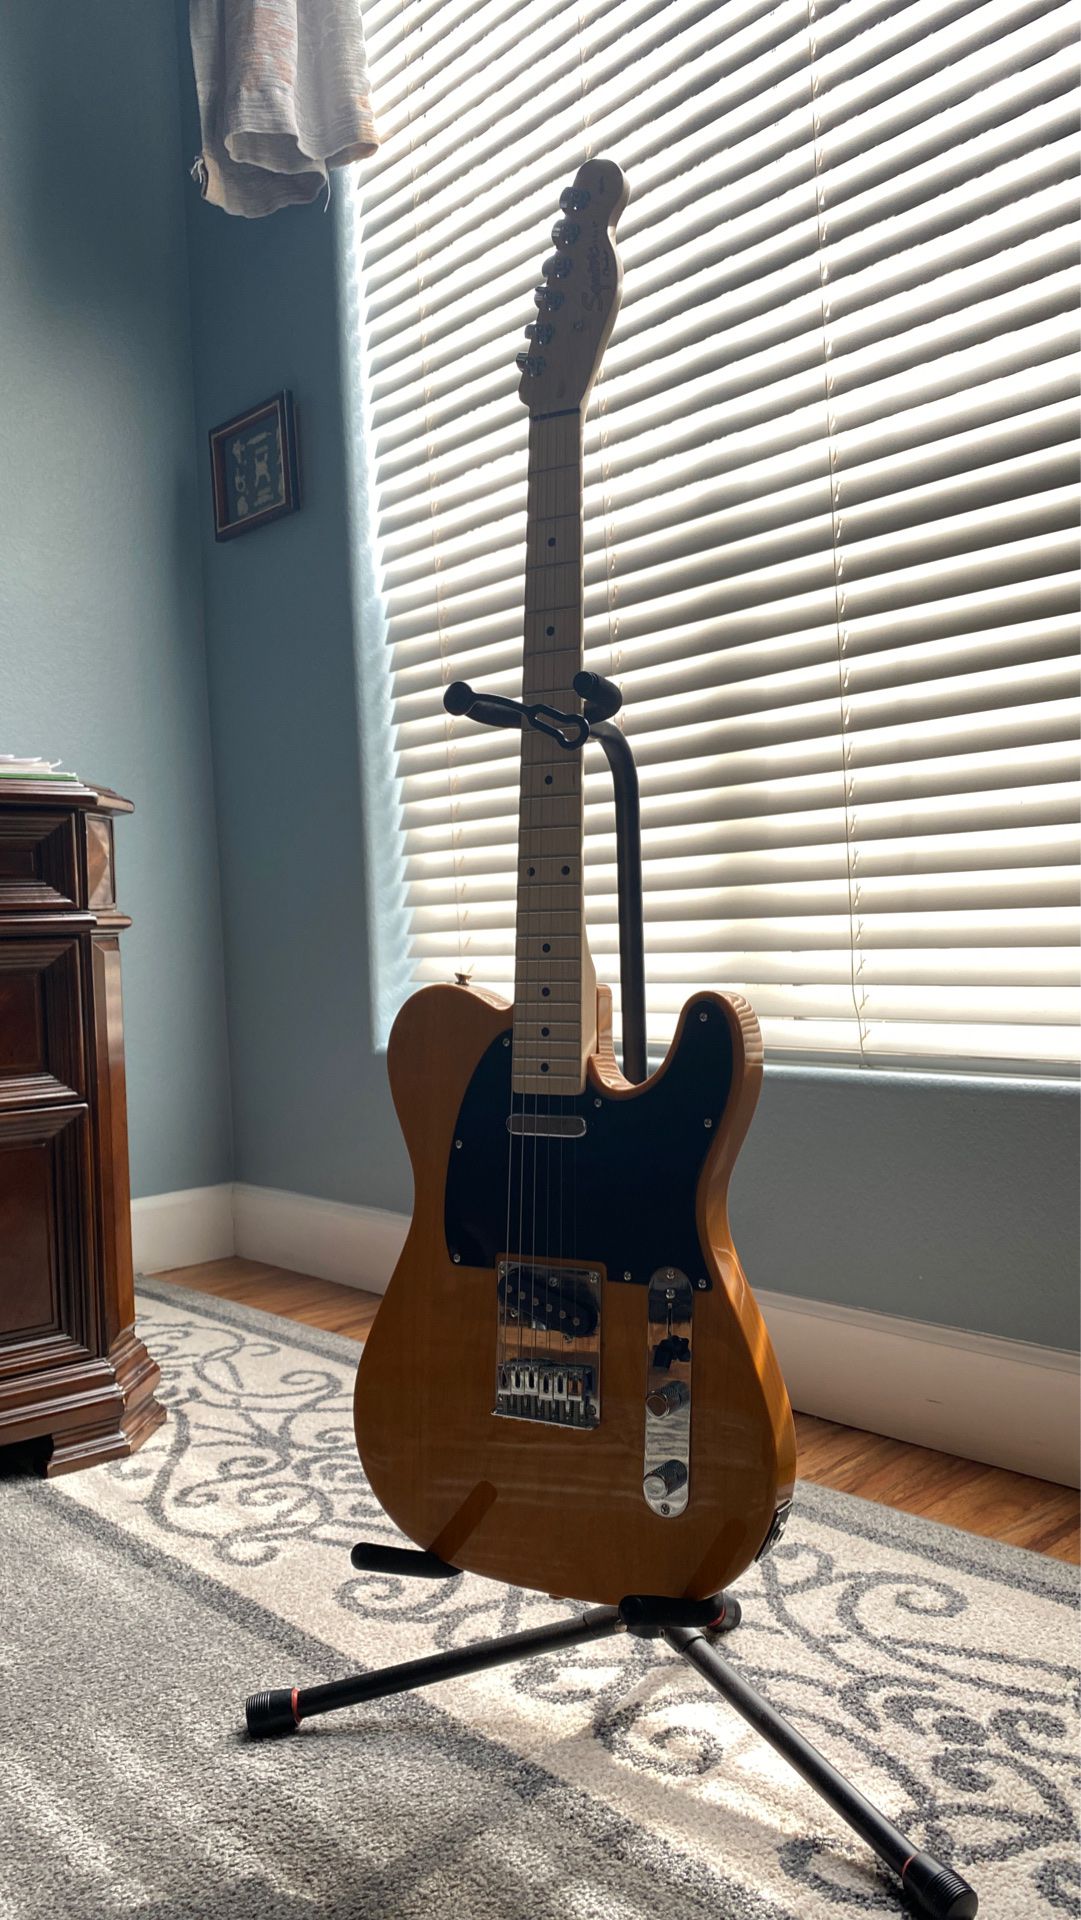 Squire telecaster electric guitar (Needs to be sold ASAP)